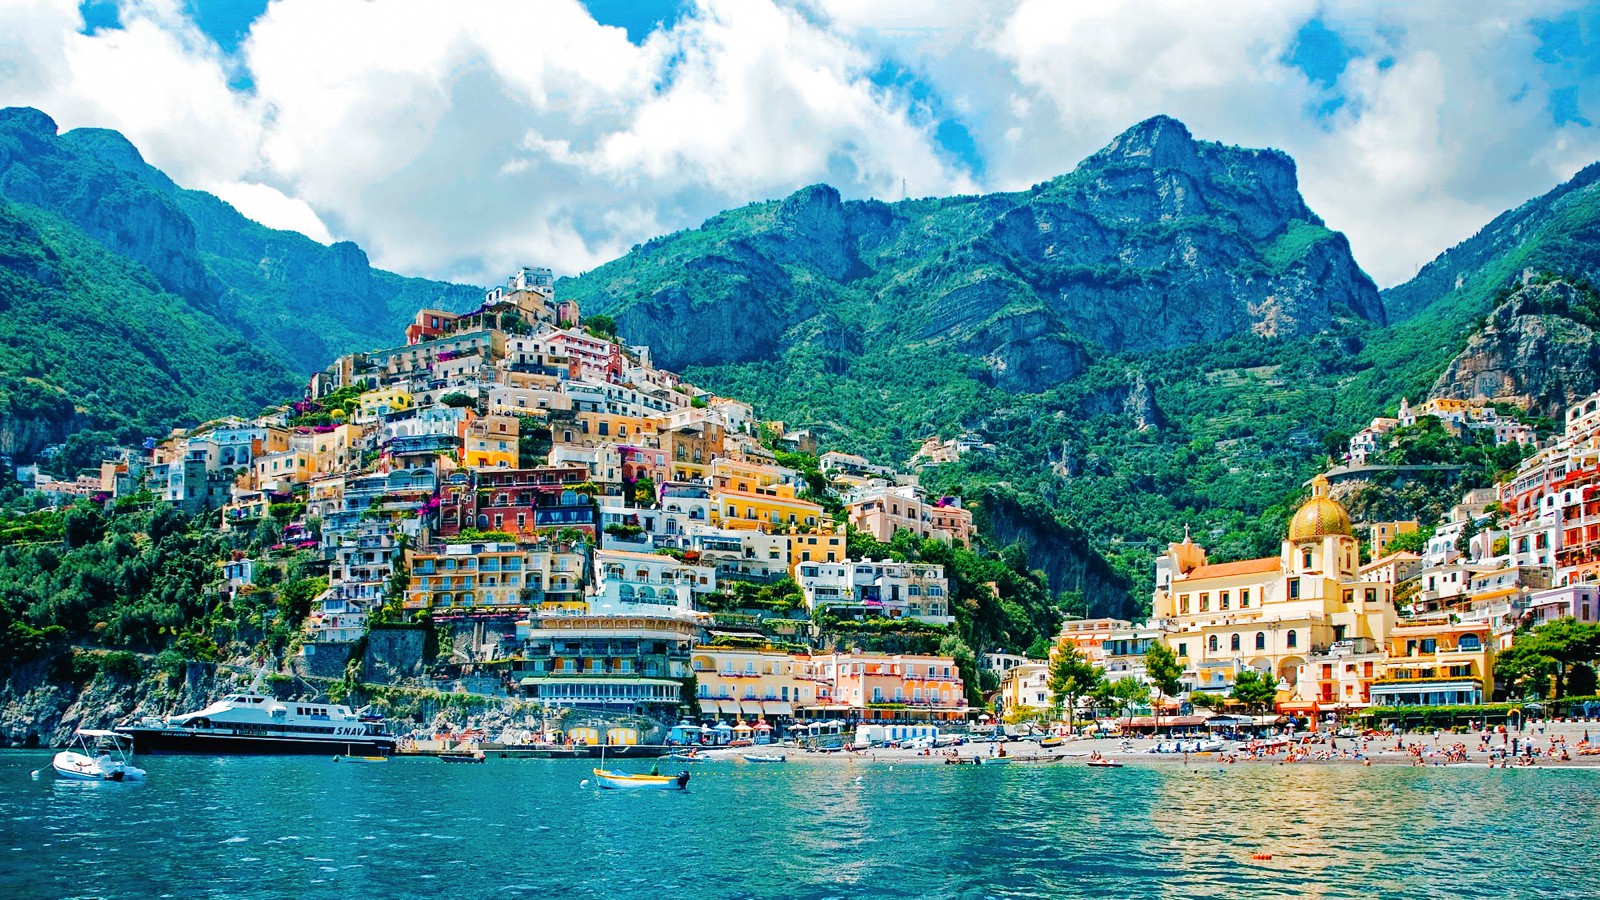 7 Reasons Why You'll Want To Visit Positano In The Amalfi Coast Of ...